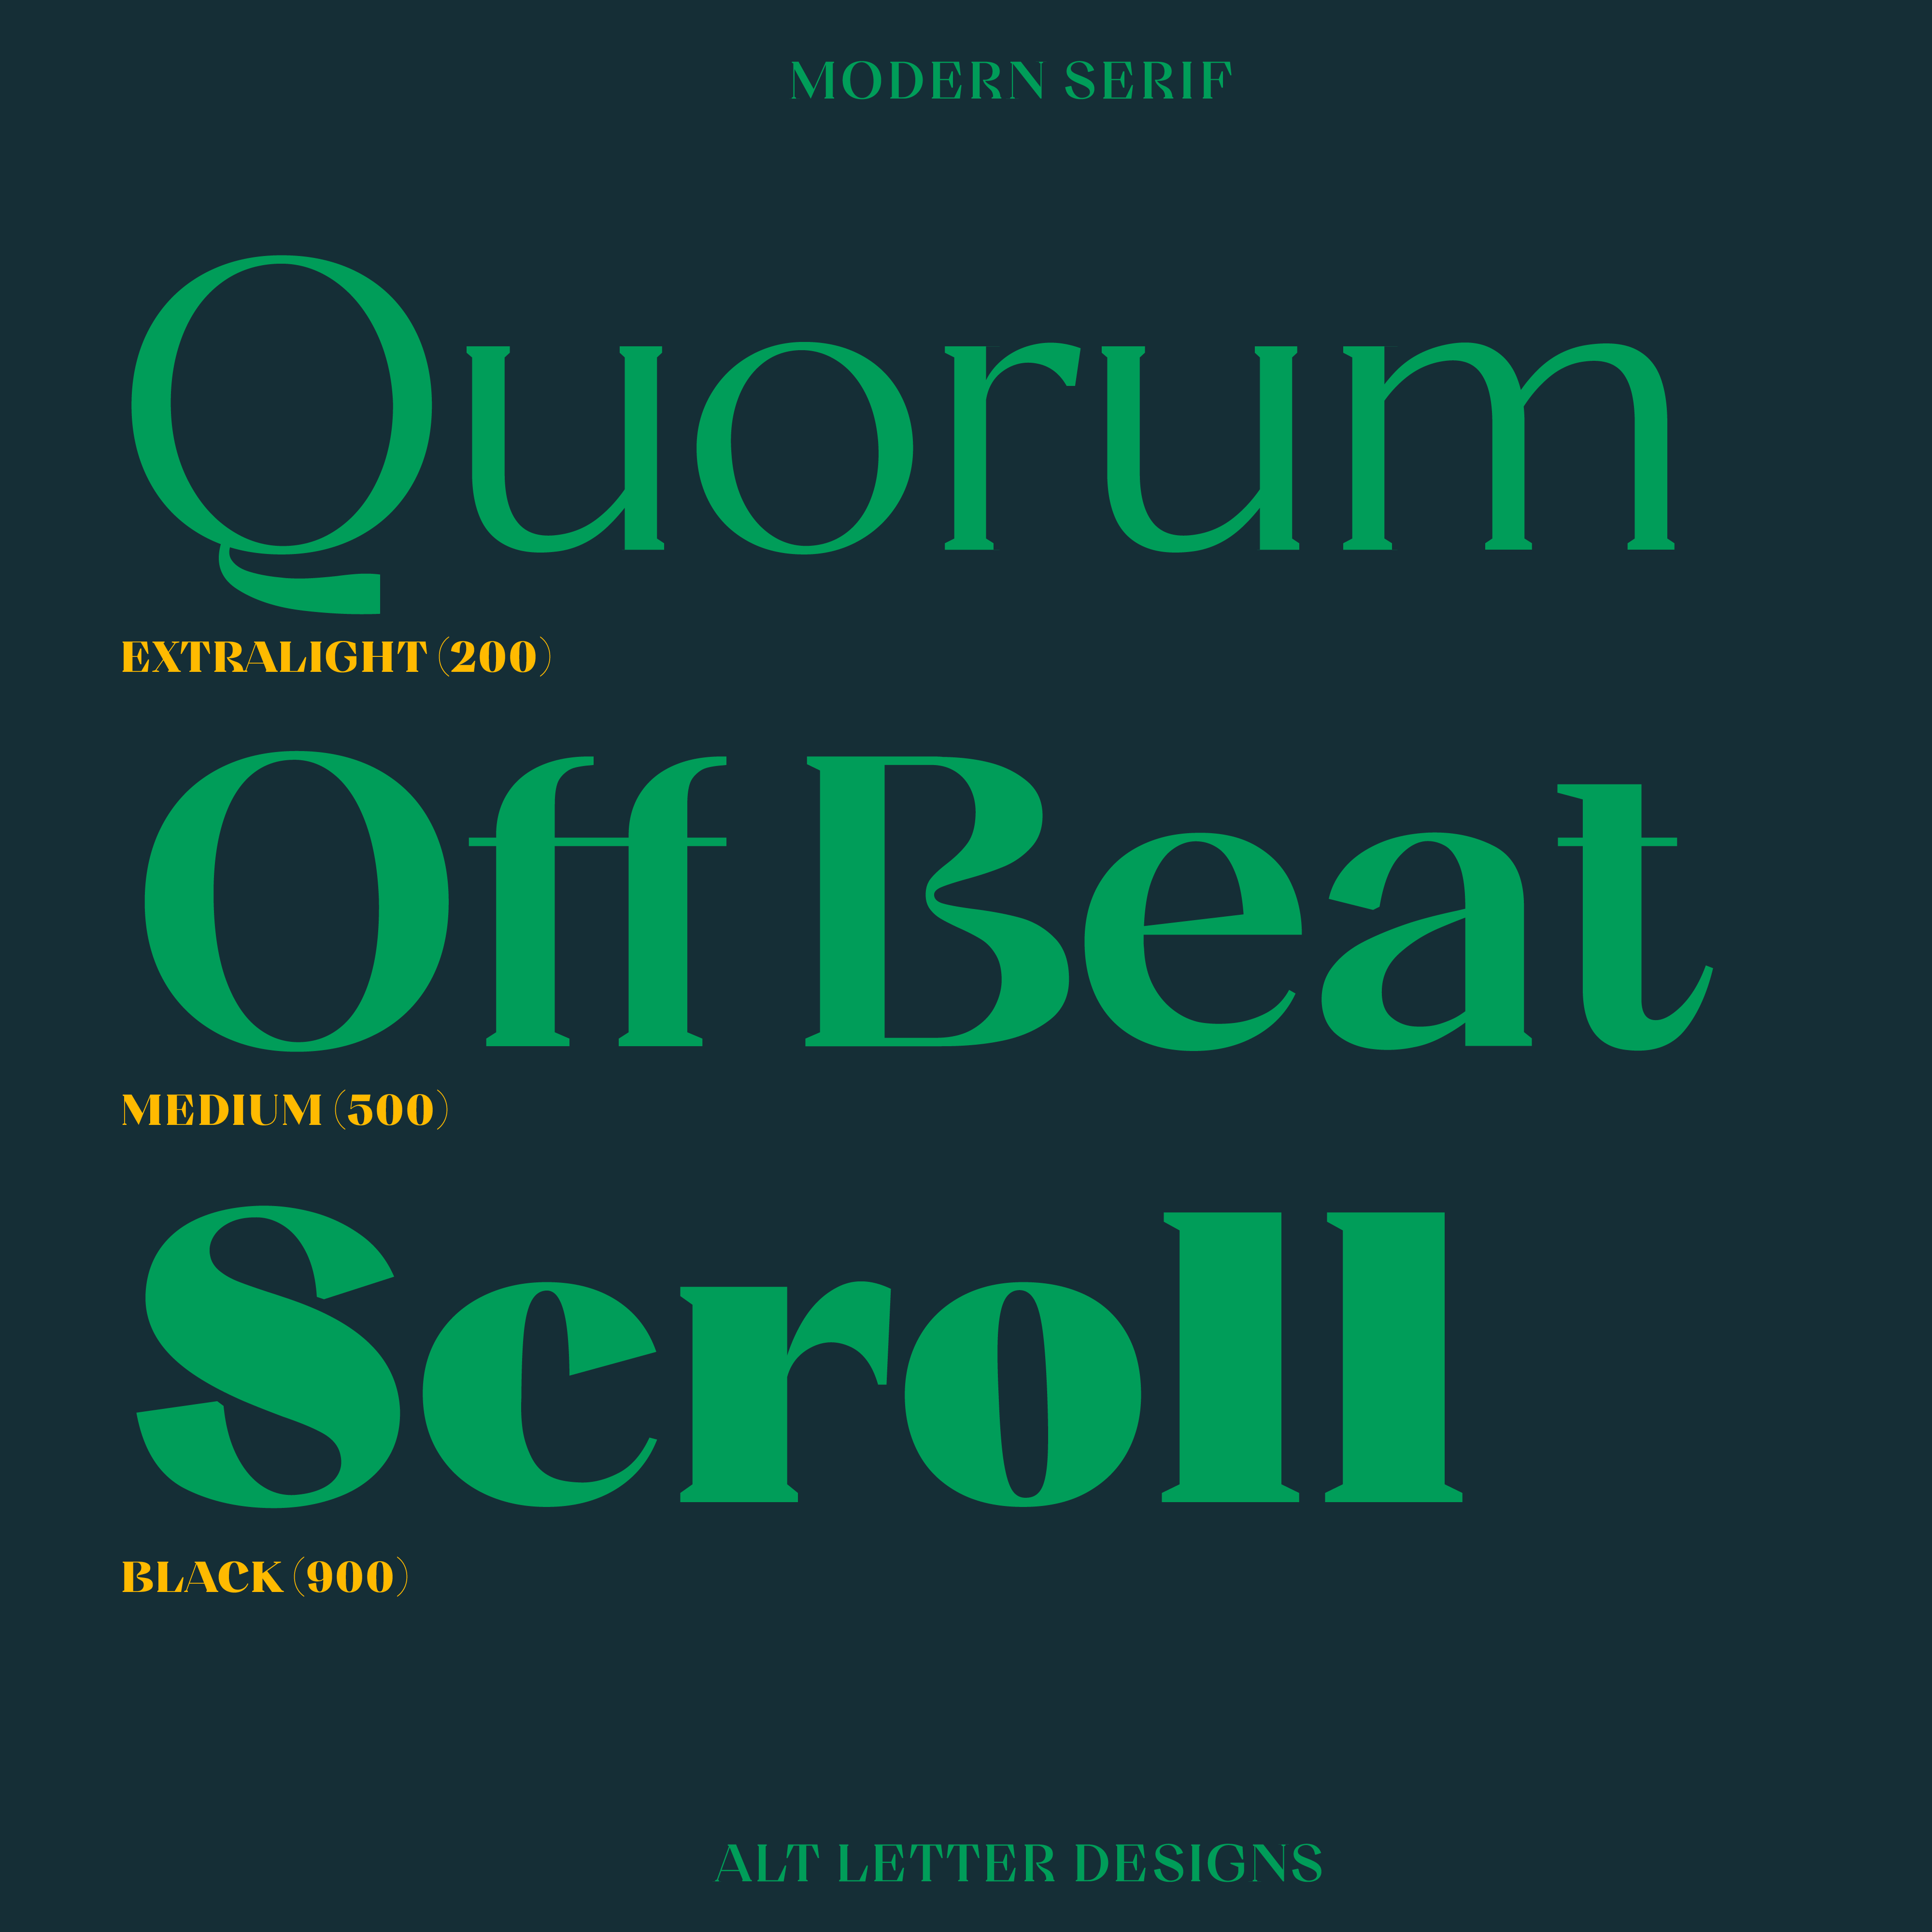 Quil font weights for logotype